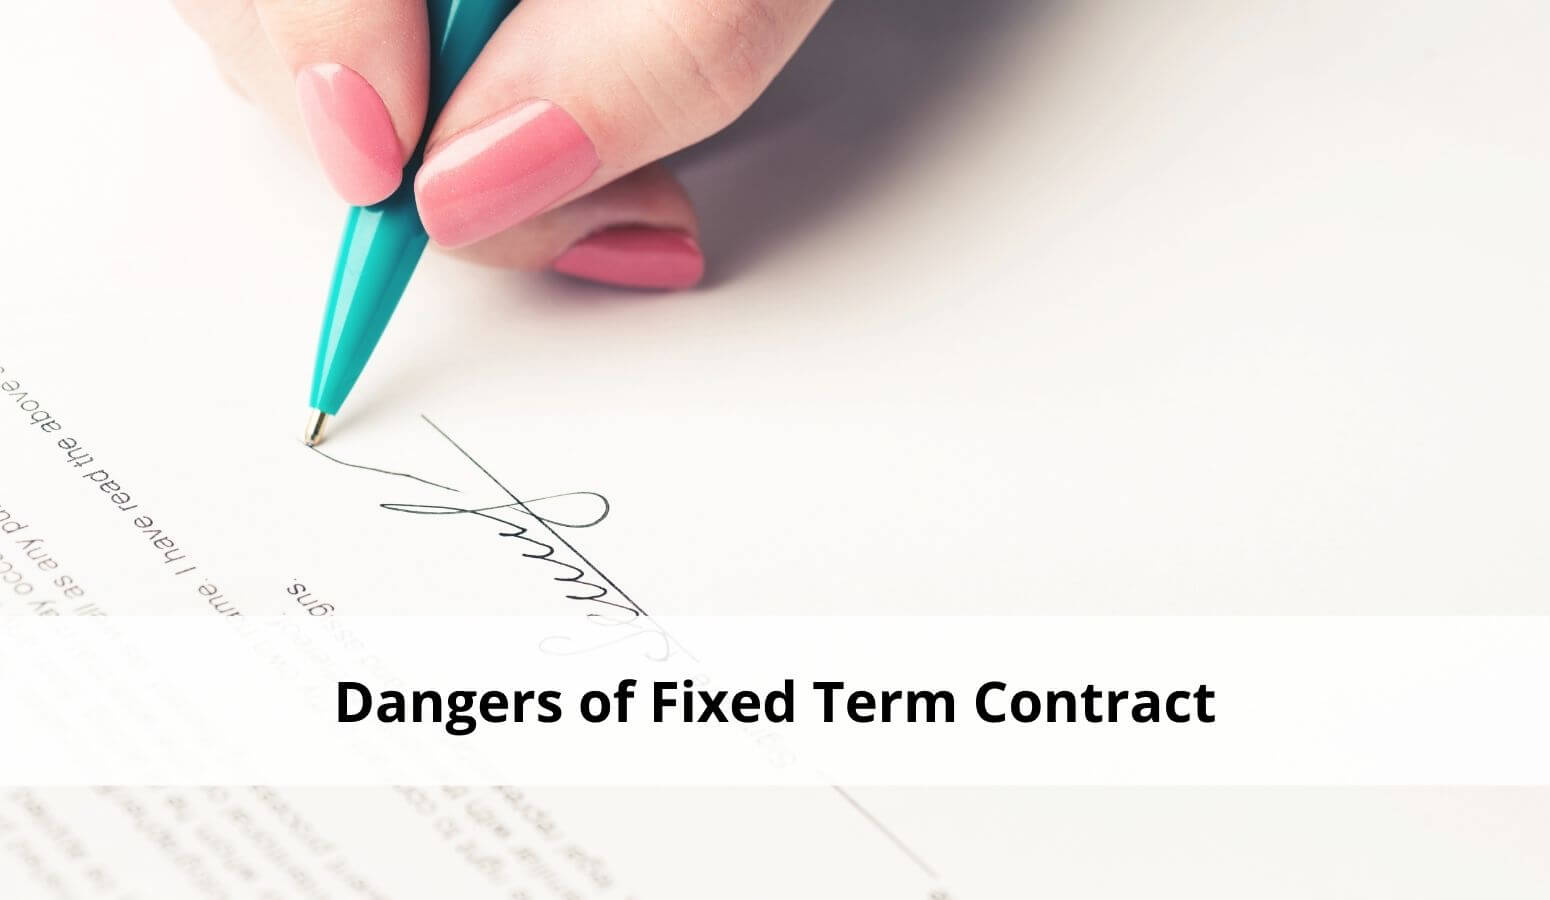 Featured image for “Dangers of Fixed Term Contract”